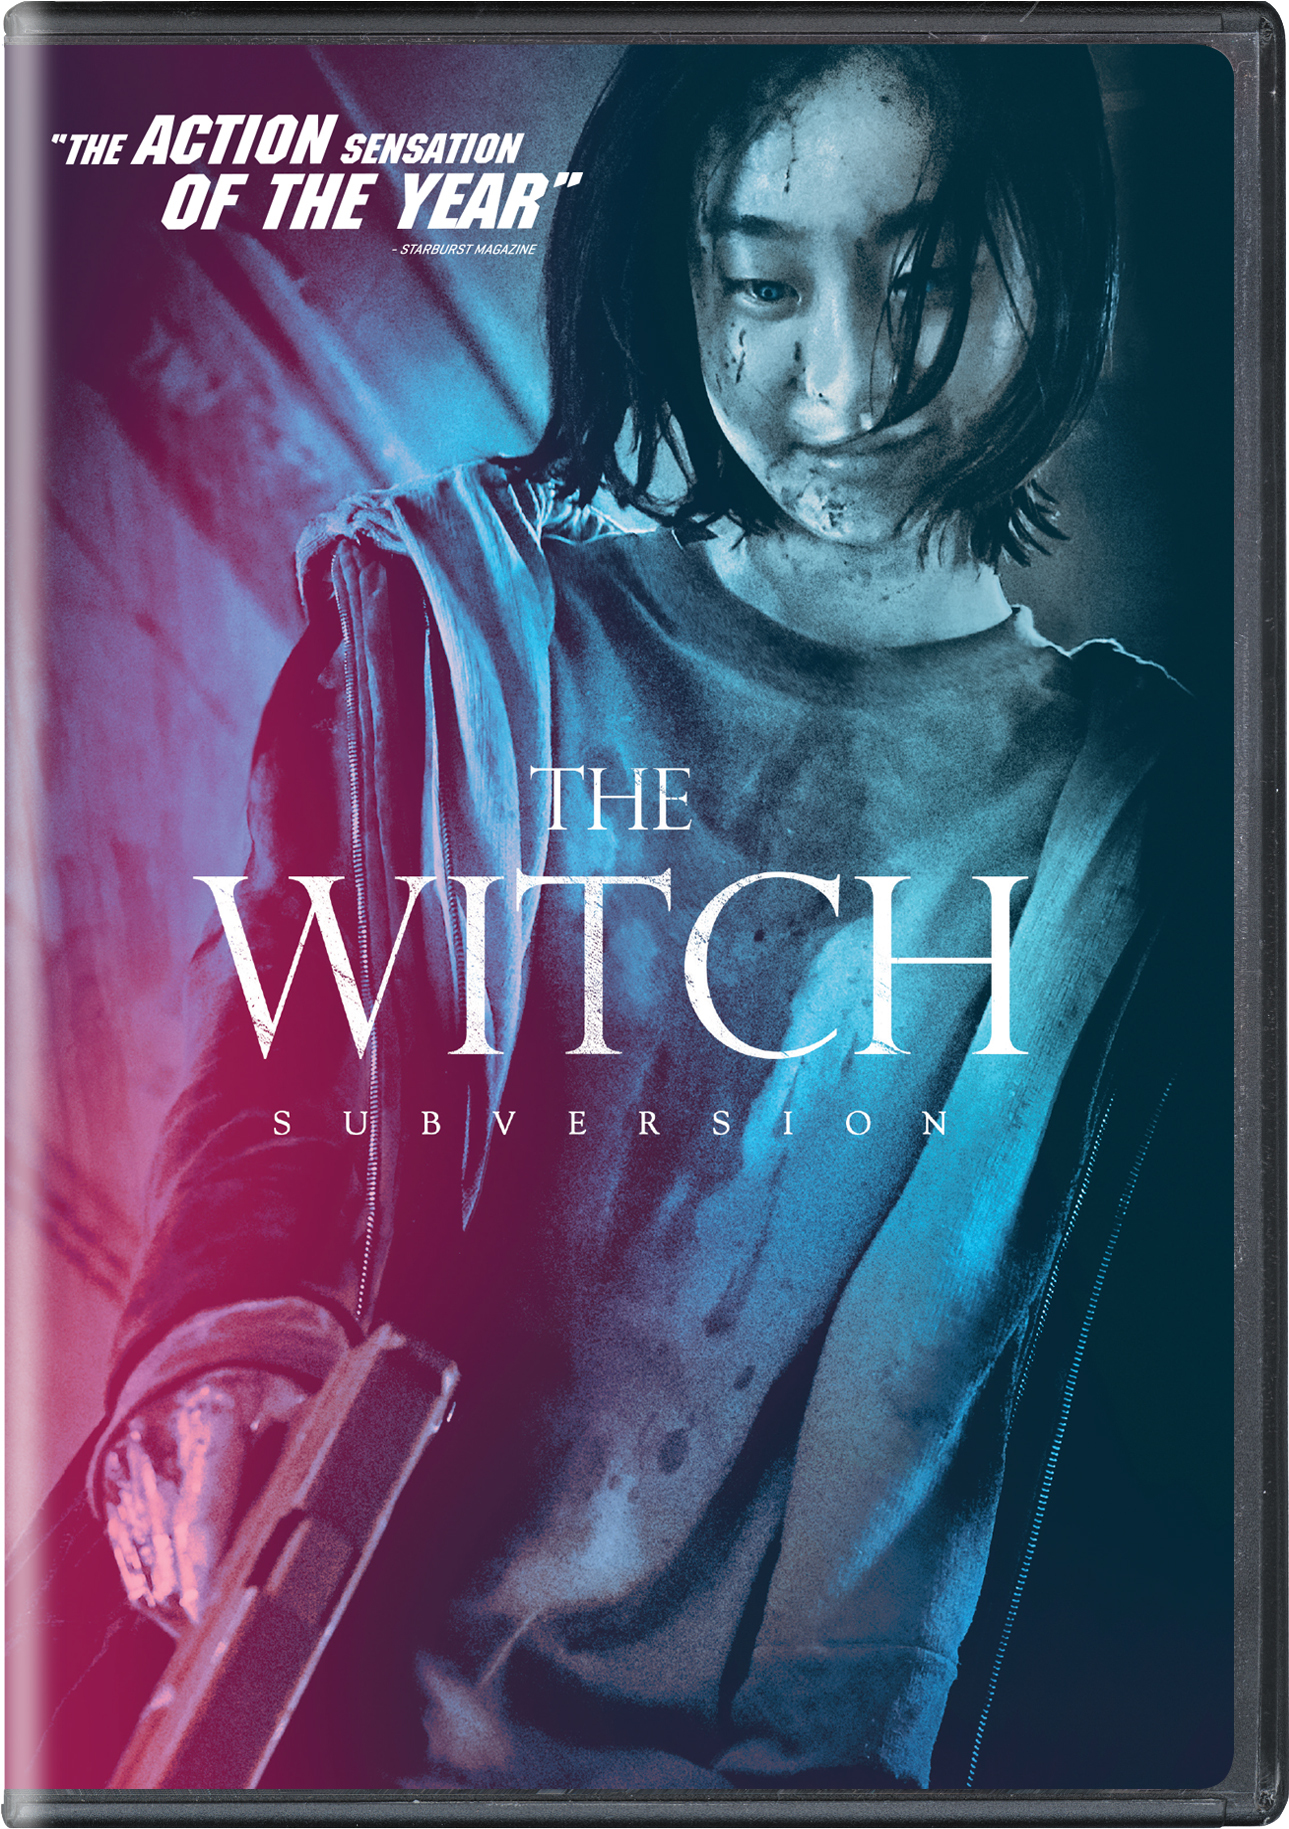 The Witch: Subversion - DVD [ 2020 ]  - Action Movies On DVD - Movies On GRUV